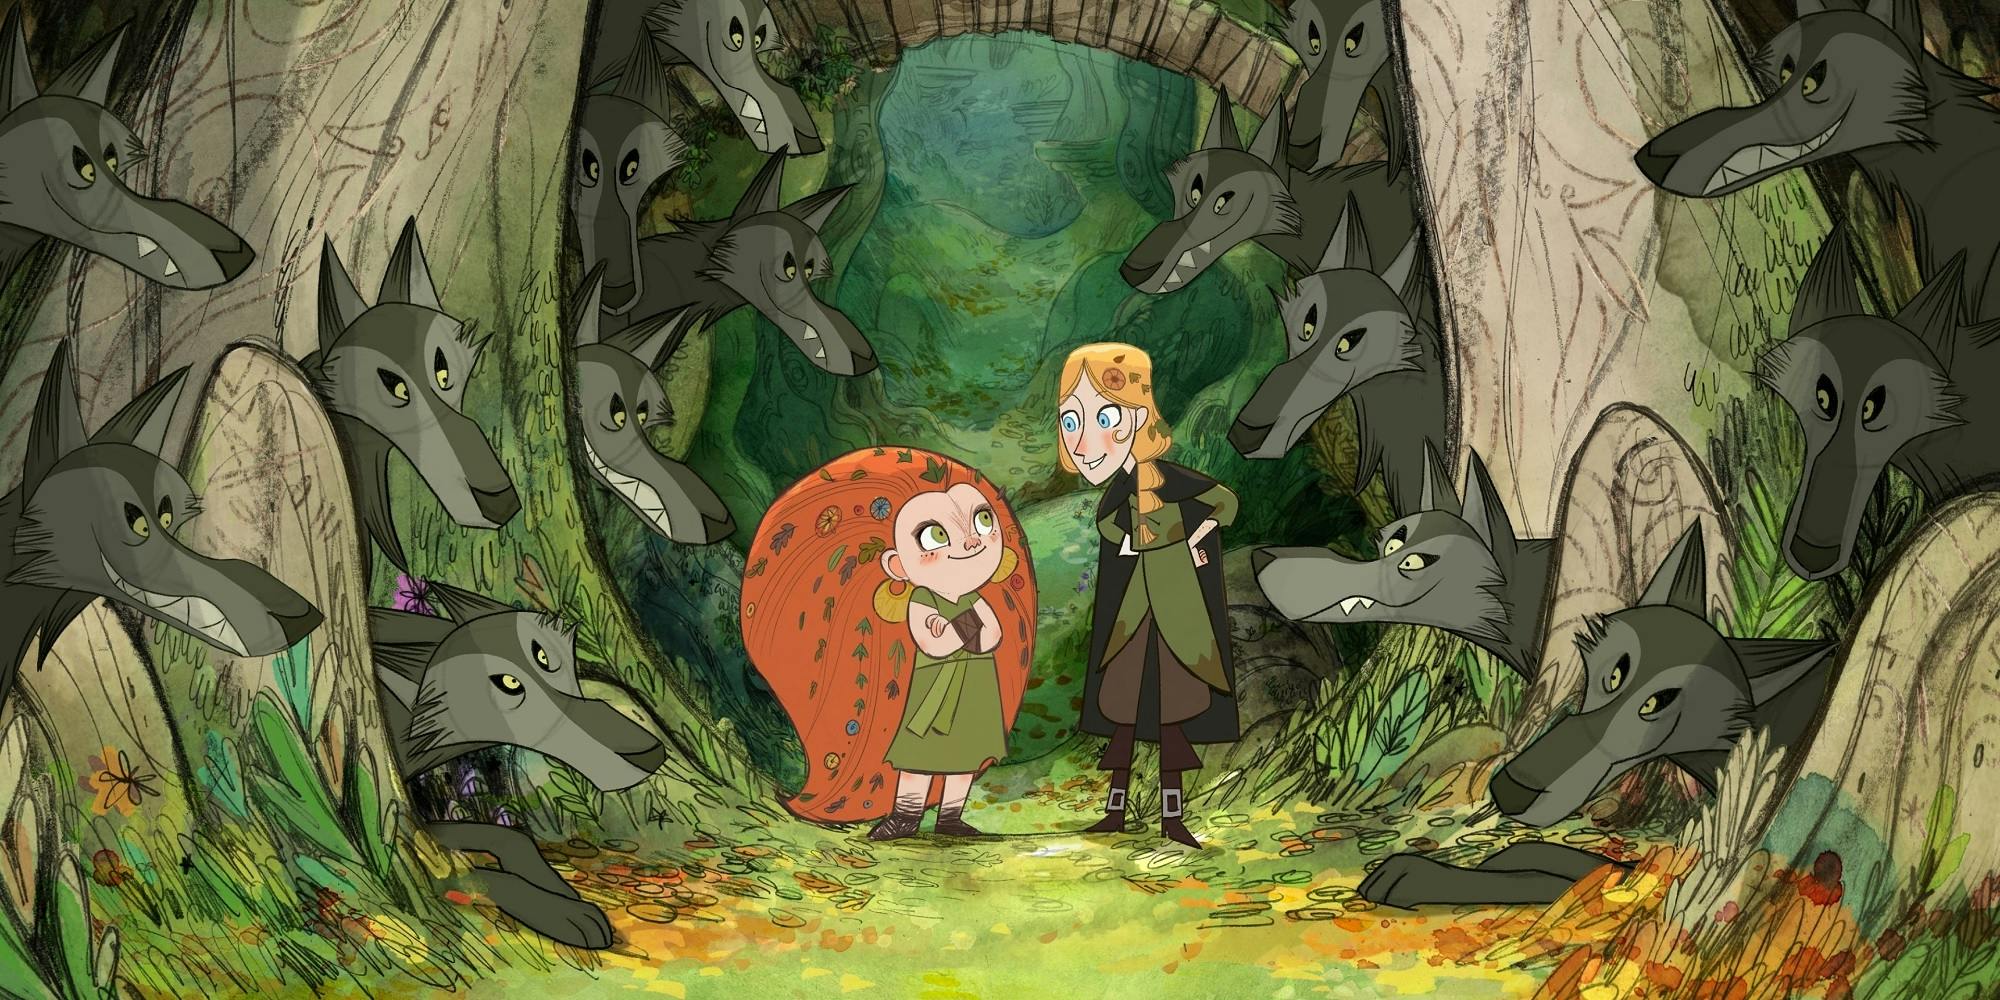 Irish Fantasy Tale 'Wolfwalkers' is one of the Best Animated Films of 2020